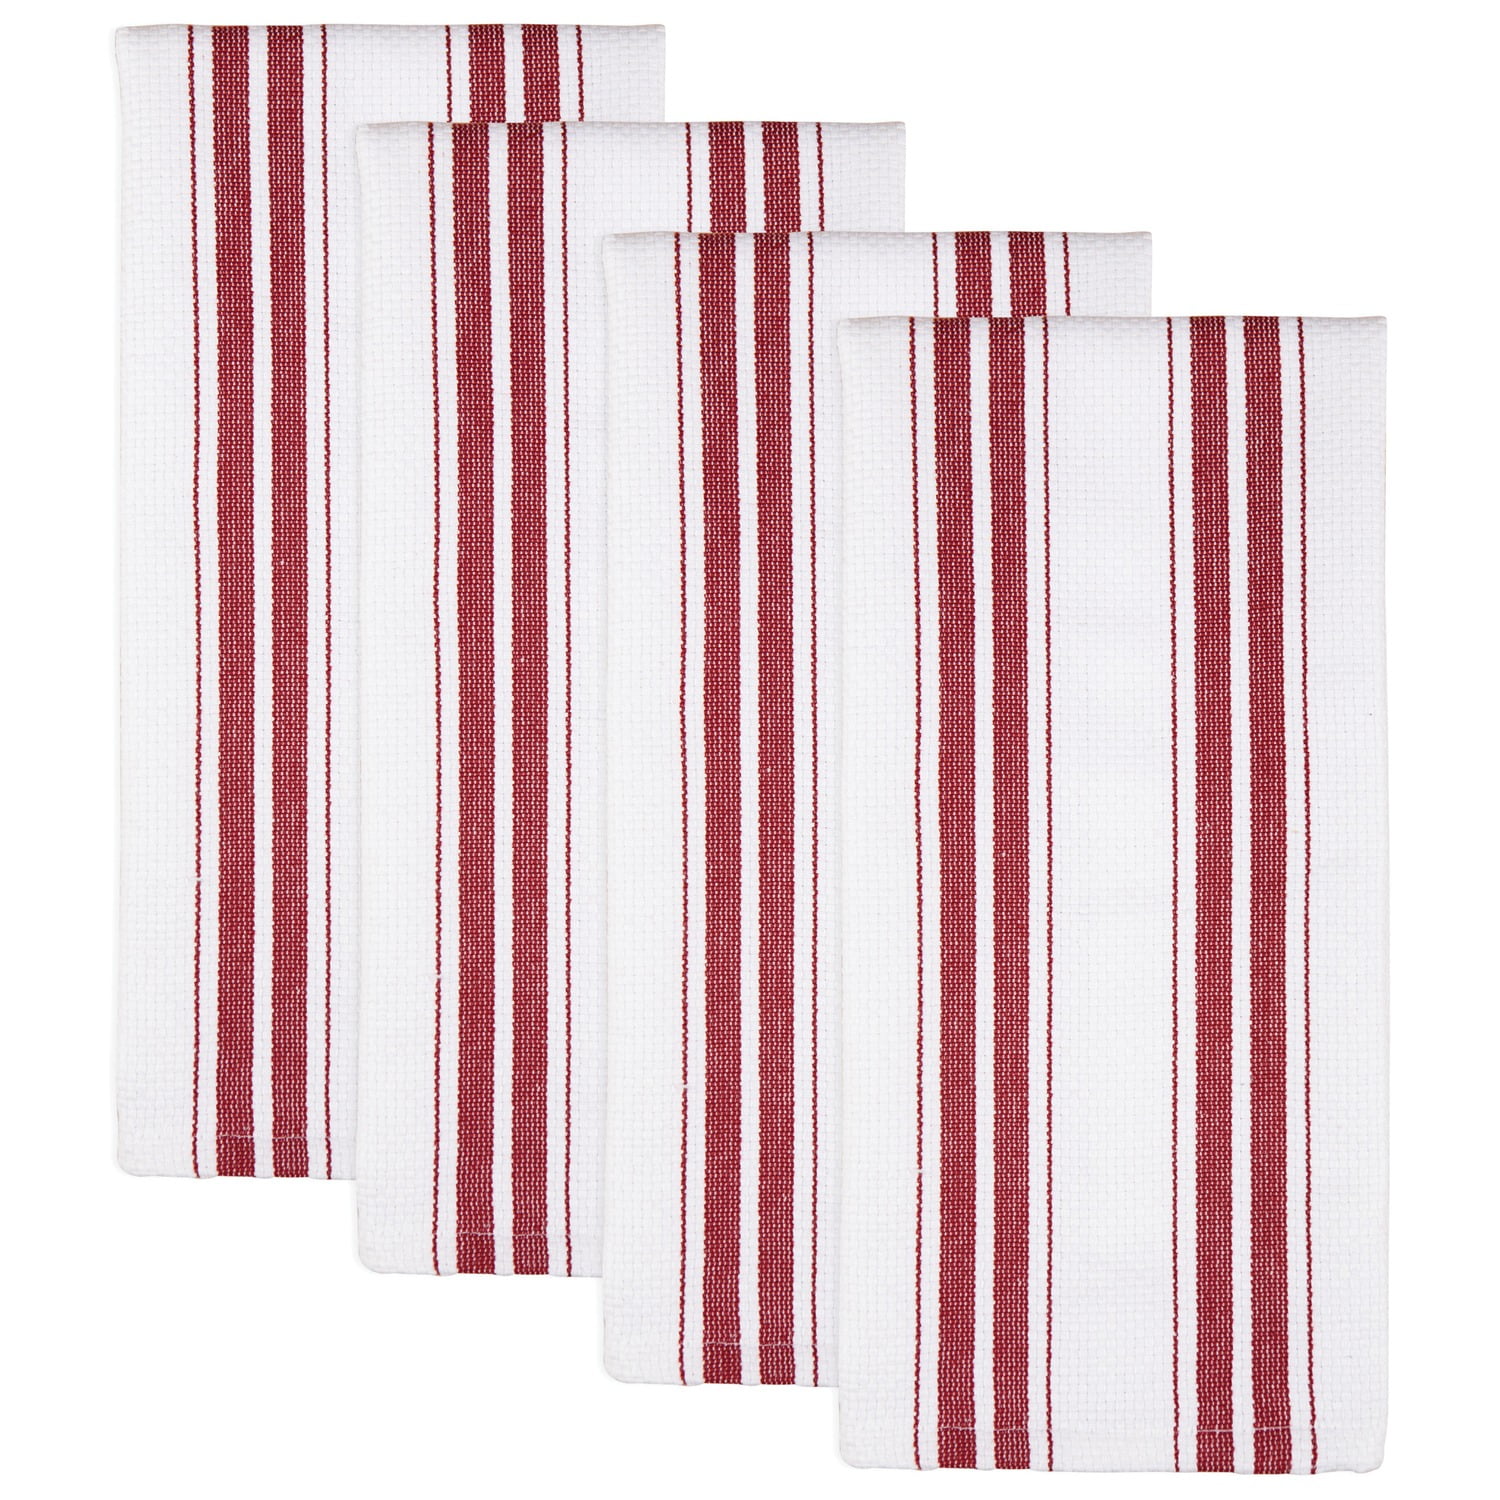 Pure Cotton Linen Clubs 8 Pack Waffle Kitchen Towels Red Color 18x26 Inches Absorbent Waffle Weave Offered 